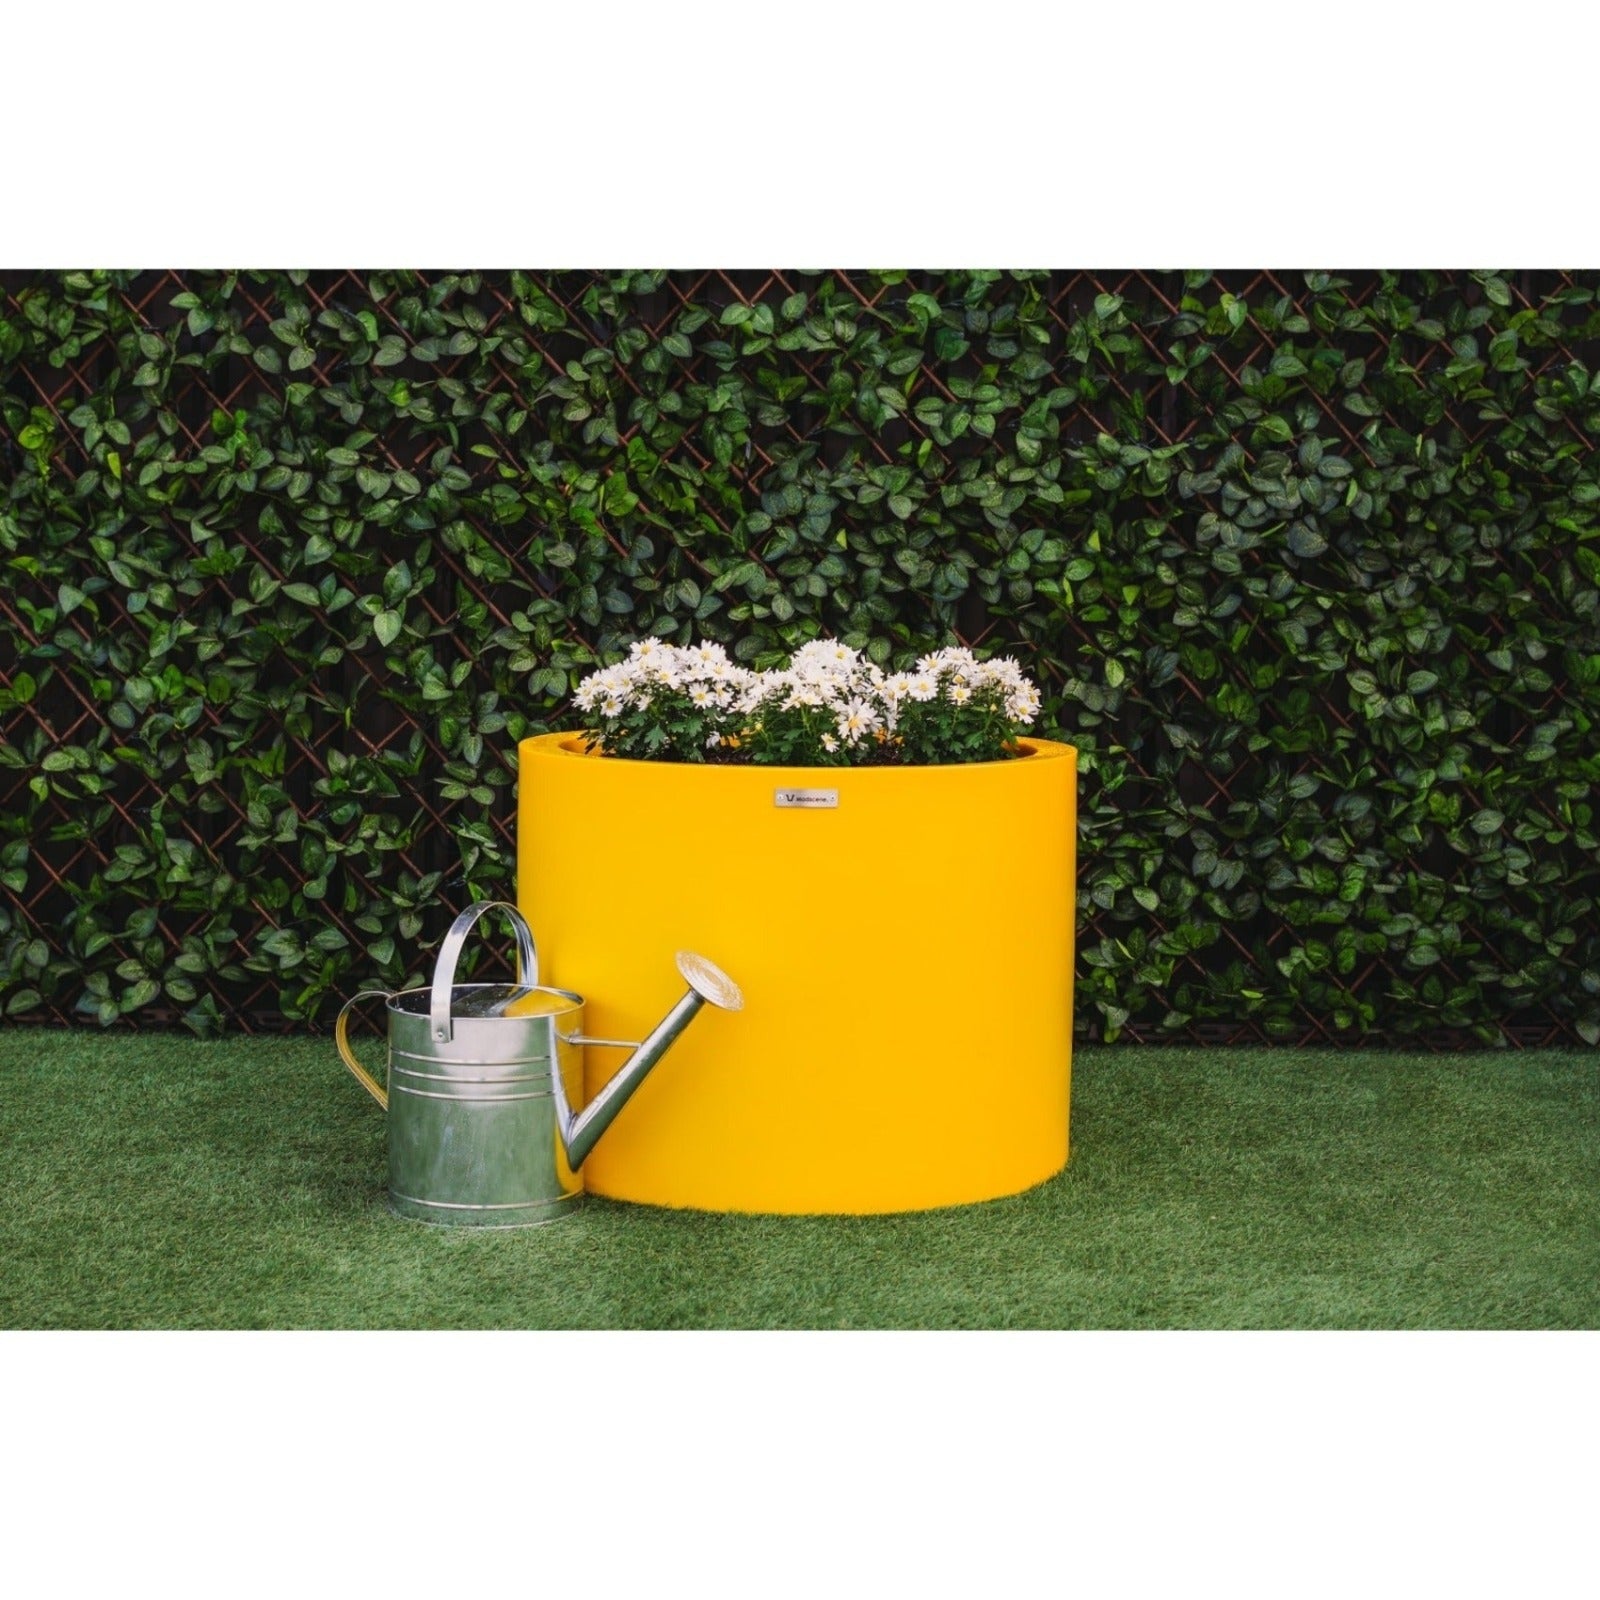 Large yellow planter pot pictured by a watering can on a lawn.